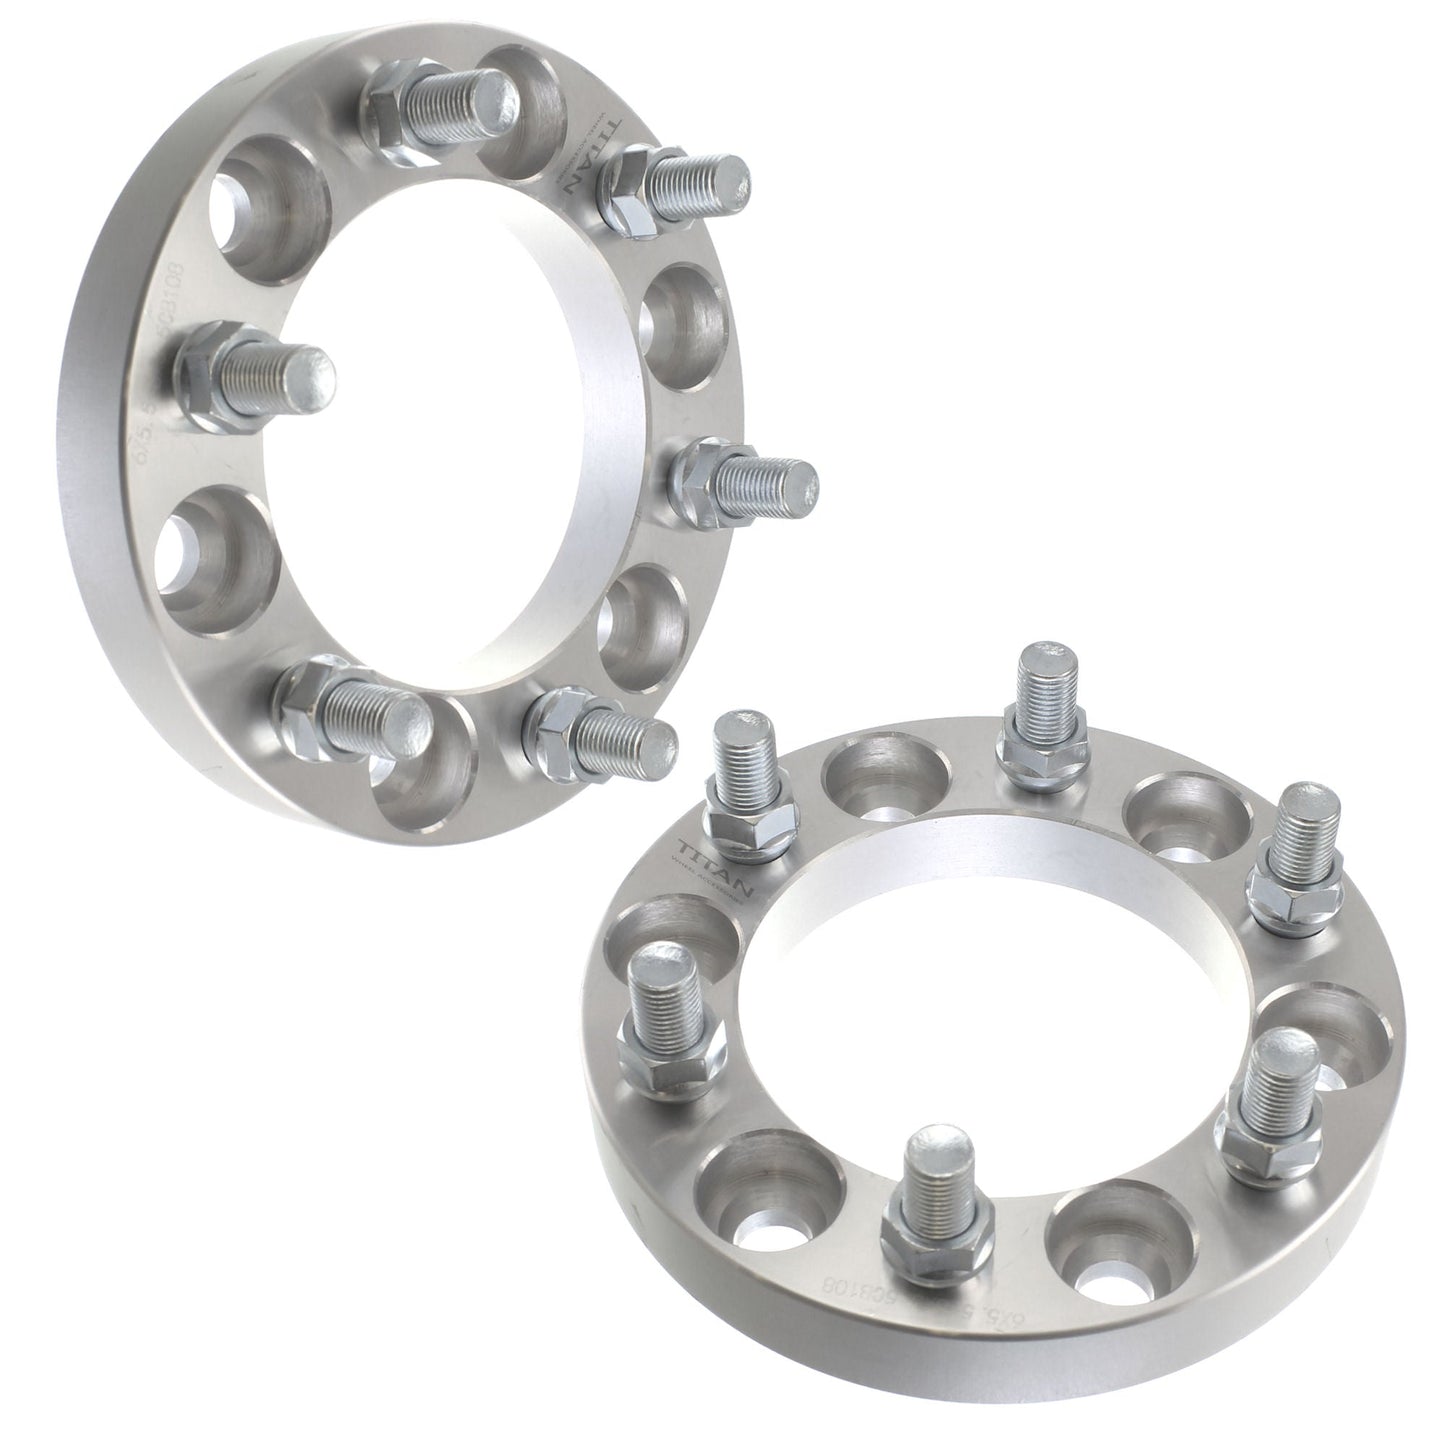 1" (25mm) Wheel Spacers for Cadillac Chevy GMC Trucks SUV | 6x5.5 (6x139.7 | 14x1.5 Studs |